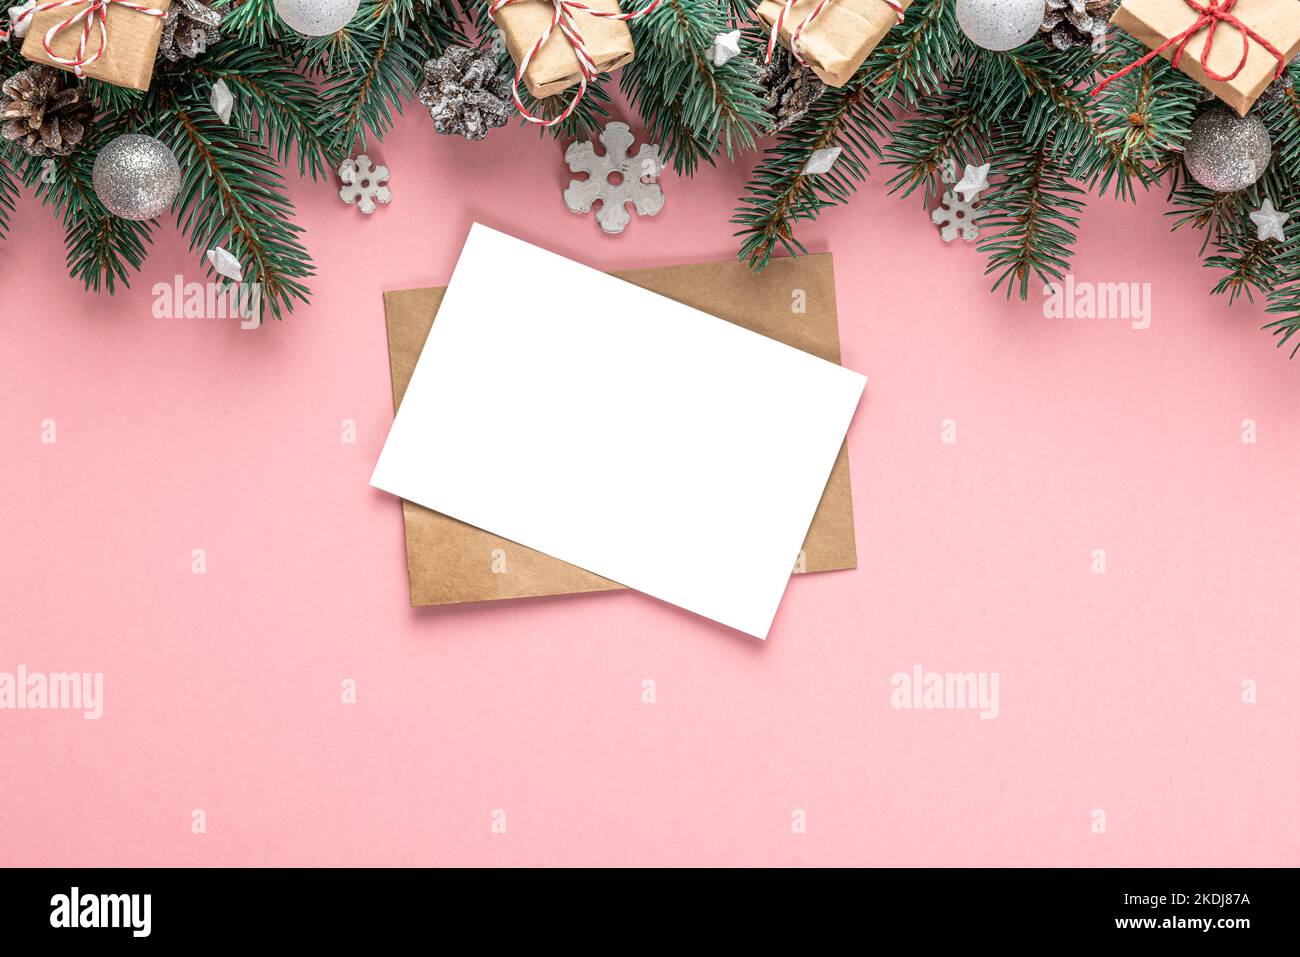 Christmas greeting card with fir tree, holiday decorations, gift boxes on pink background. Flat lay. Mock up. Top view with copy space. Festive backgr Stock Photo